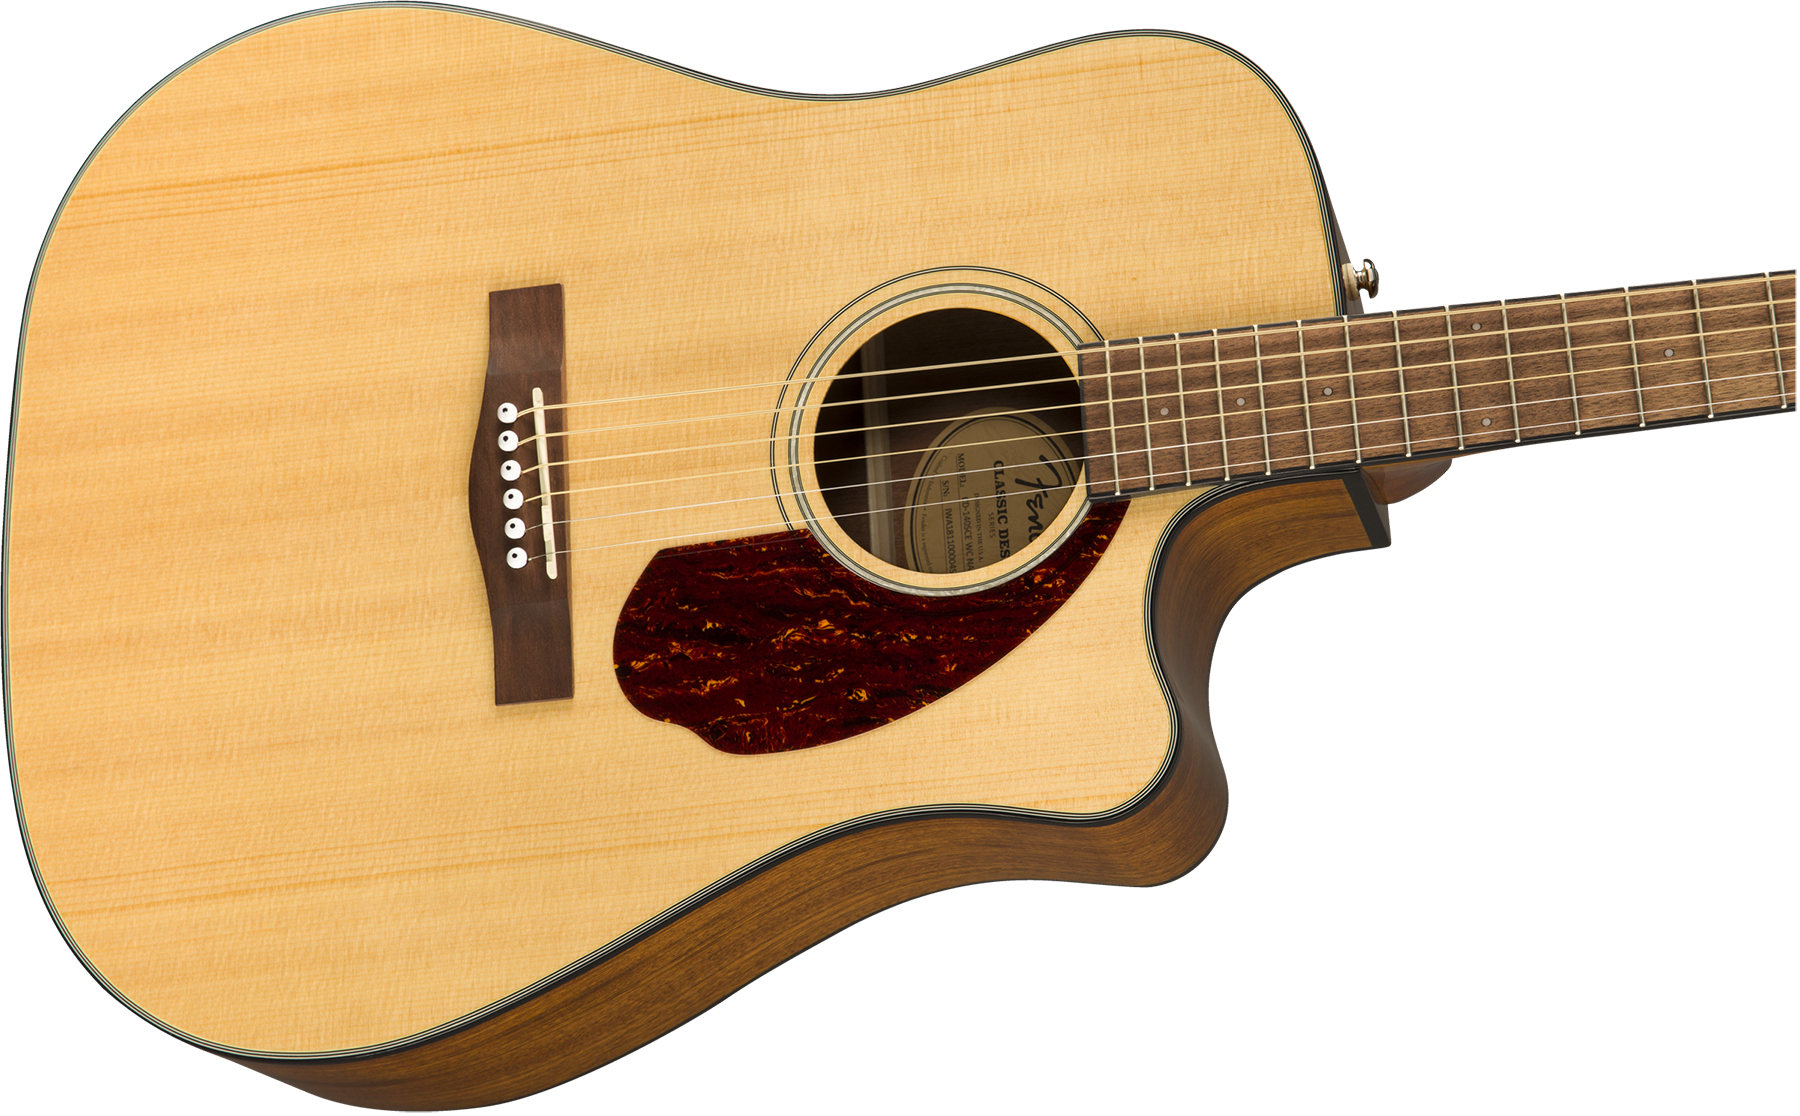 Fender Cd-140sce Classic Design Dreadnought Cw Epicea Ovangkol Wal +etui - Natural - Electro acoustic guitar - Variation 2